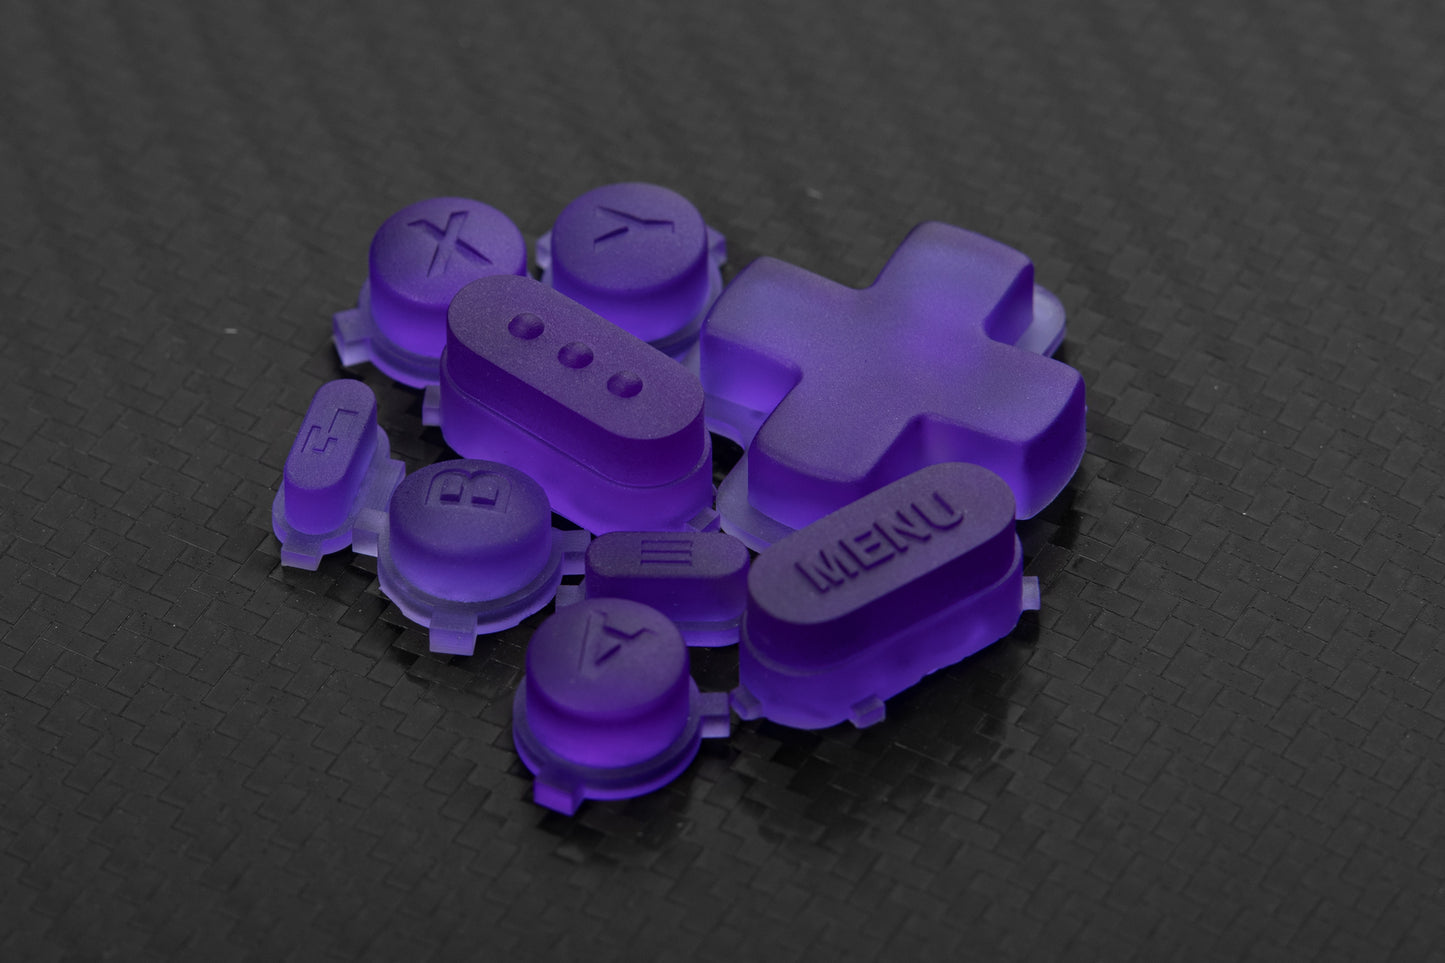 transparent purple steam deck buttons in a loose pile